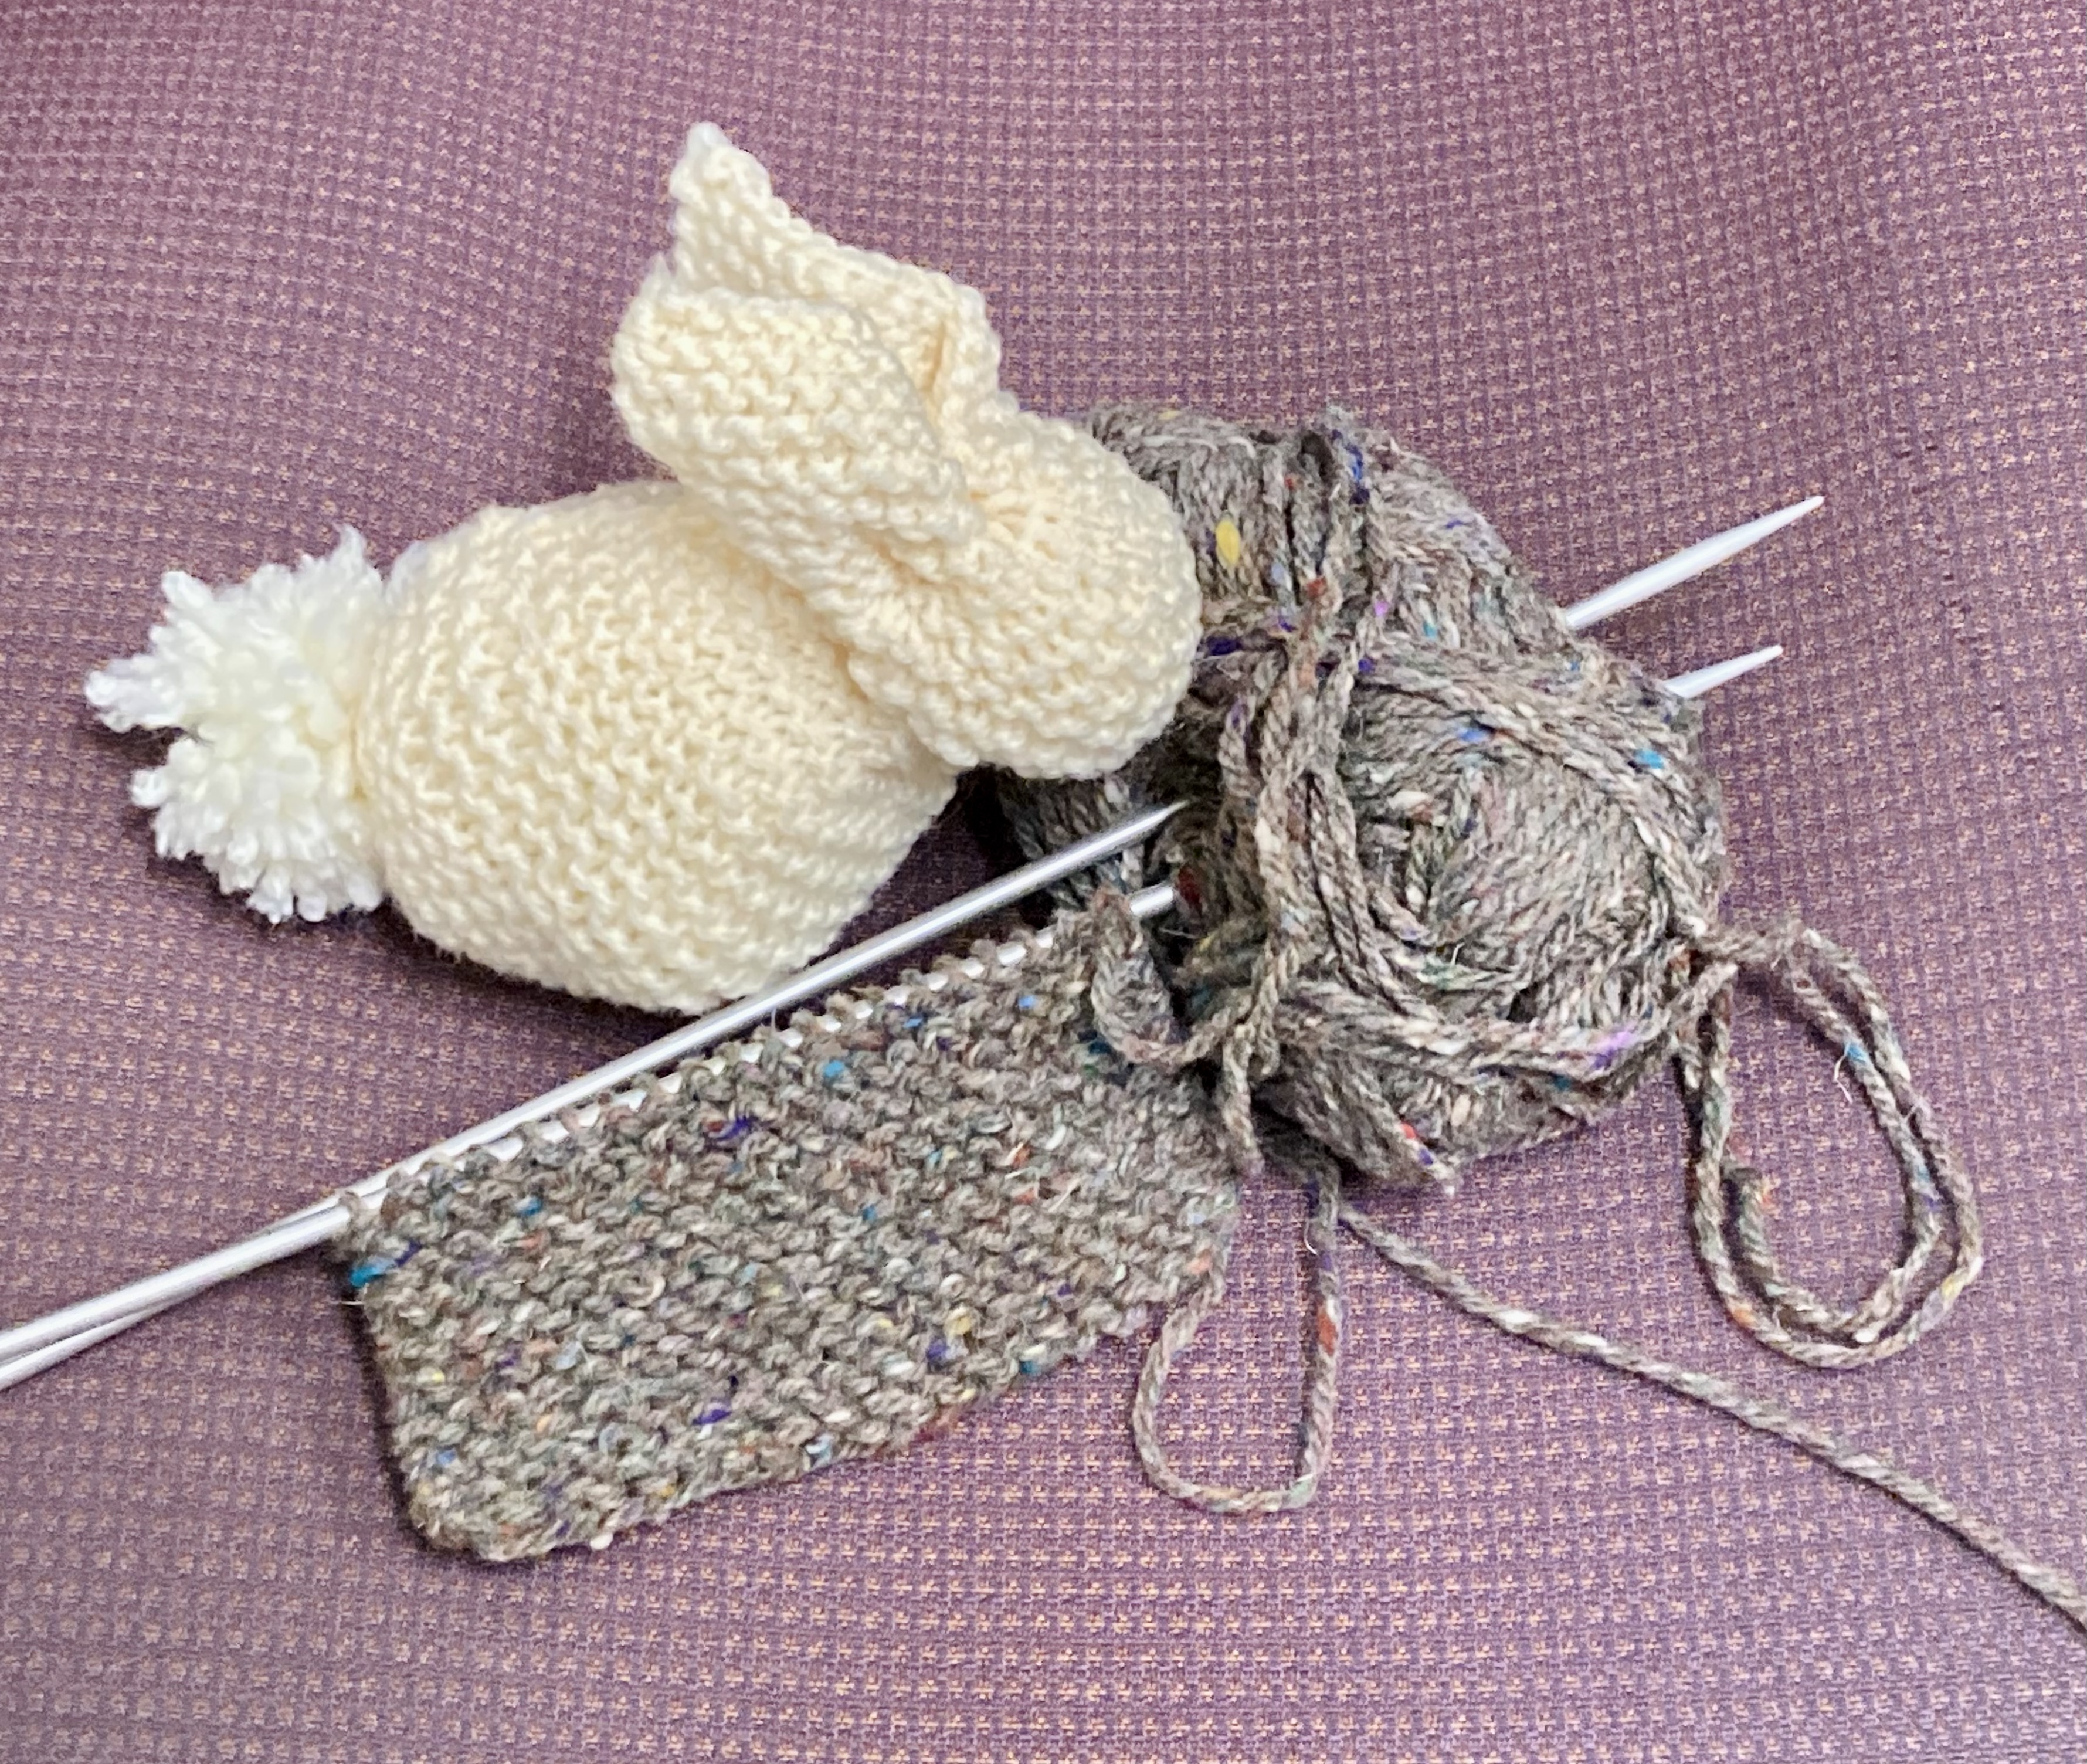 A cream colored knit rabbit sits next to a pair of knitting needles with a project on it stabbed through some yarn